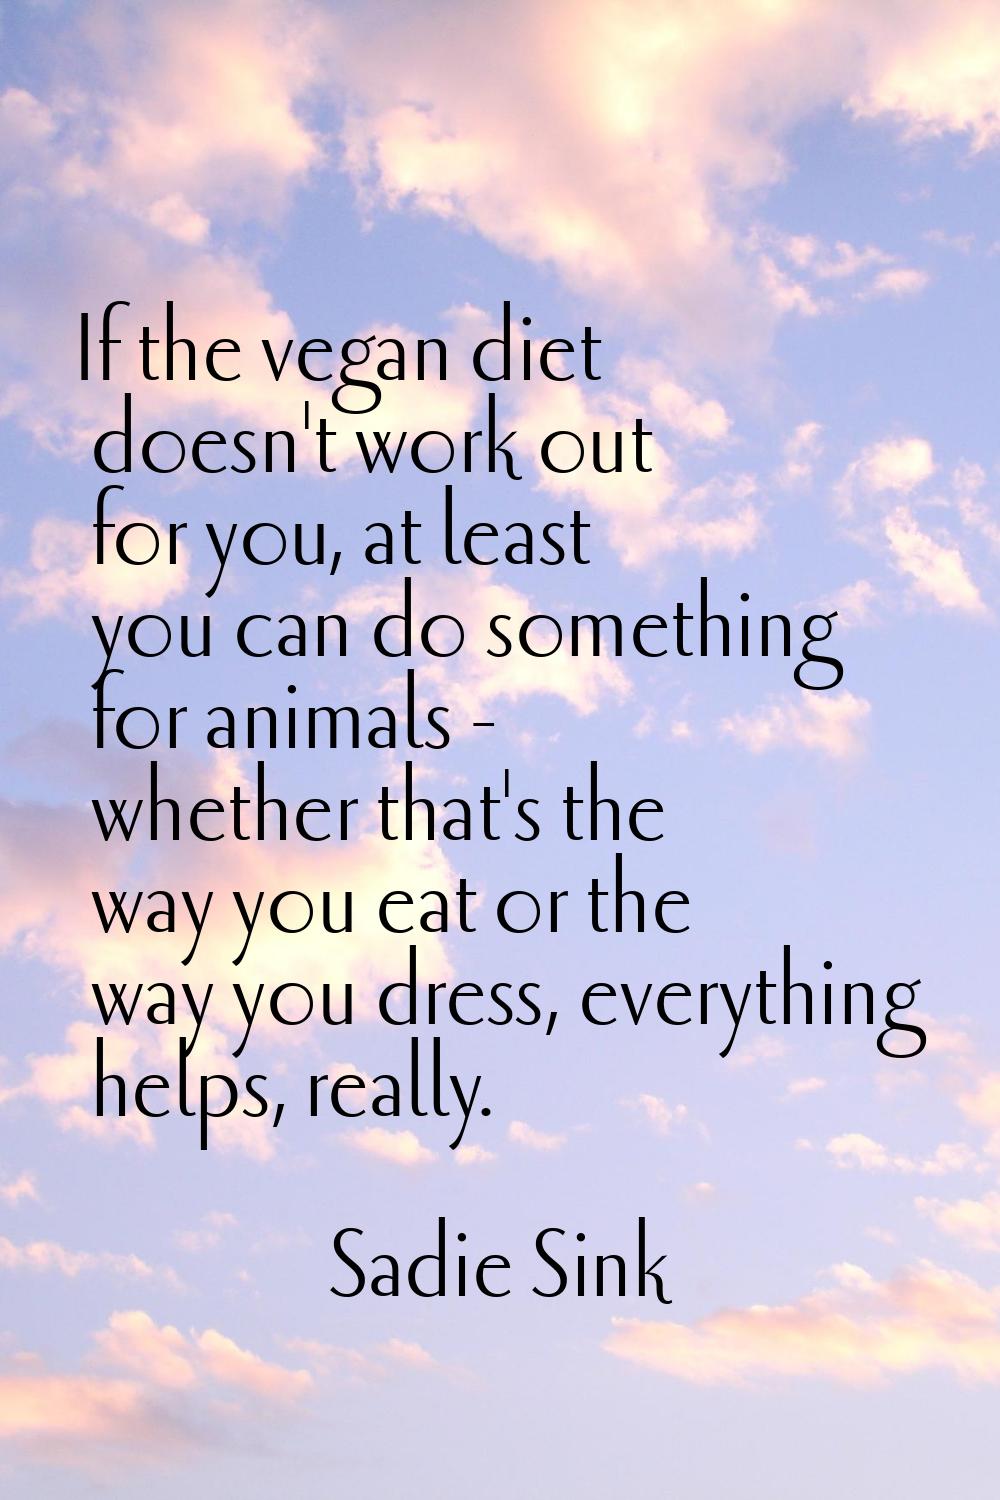 If the vegan diet doesn't work out for you, at least you can do something for animals - whether tha